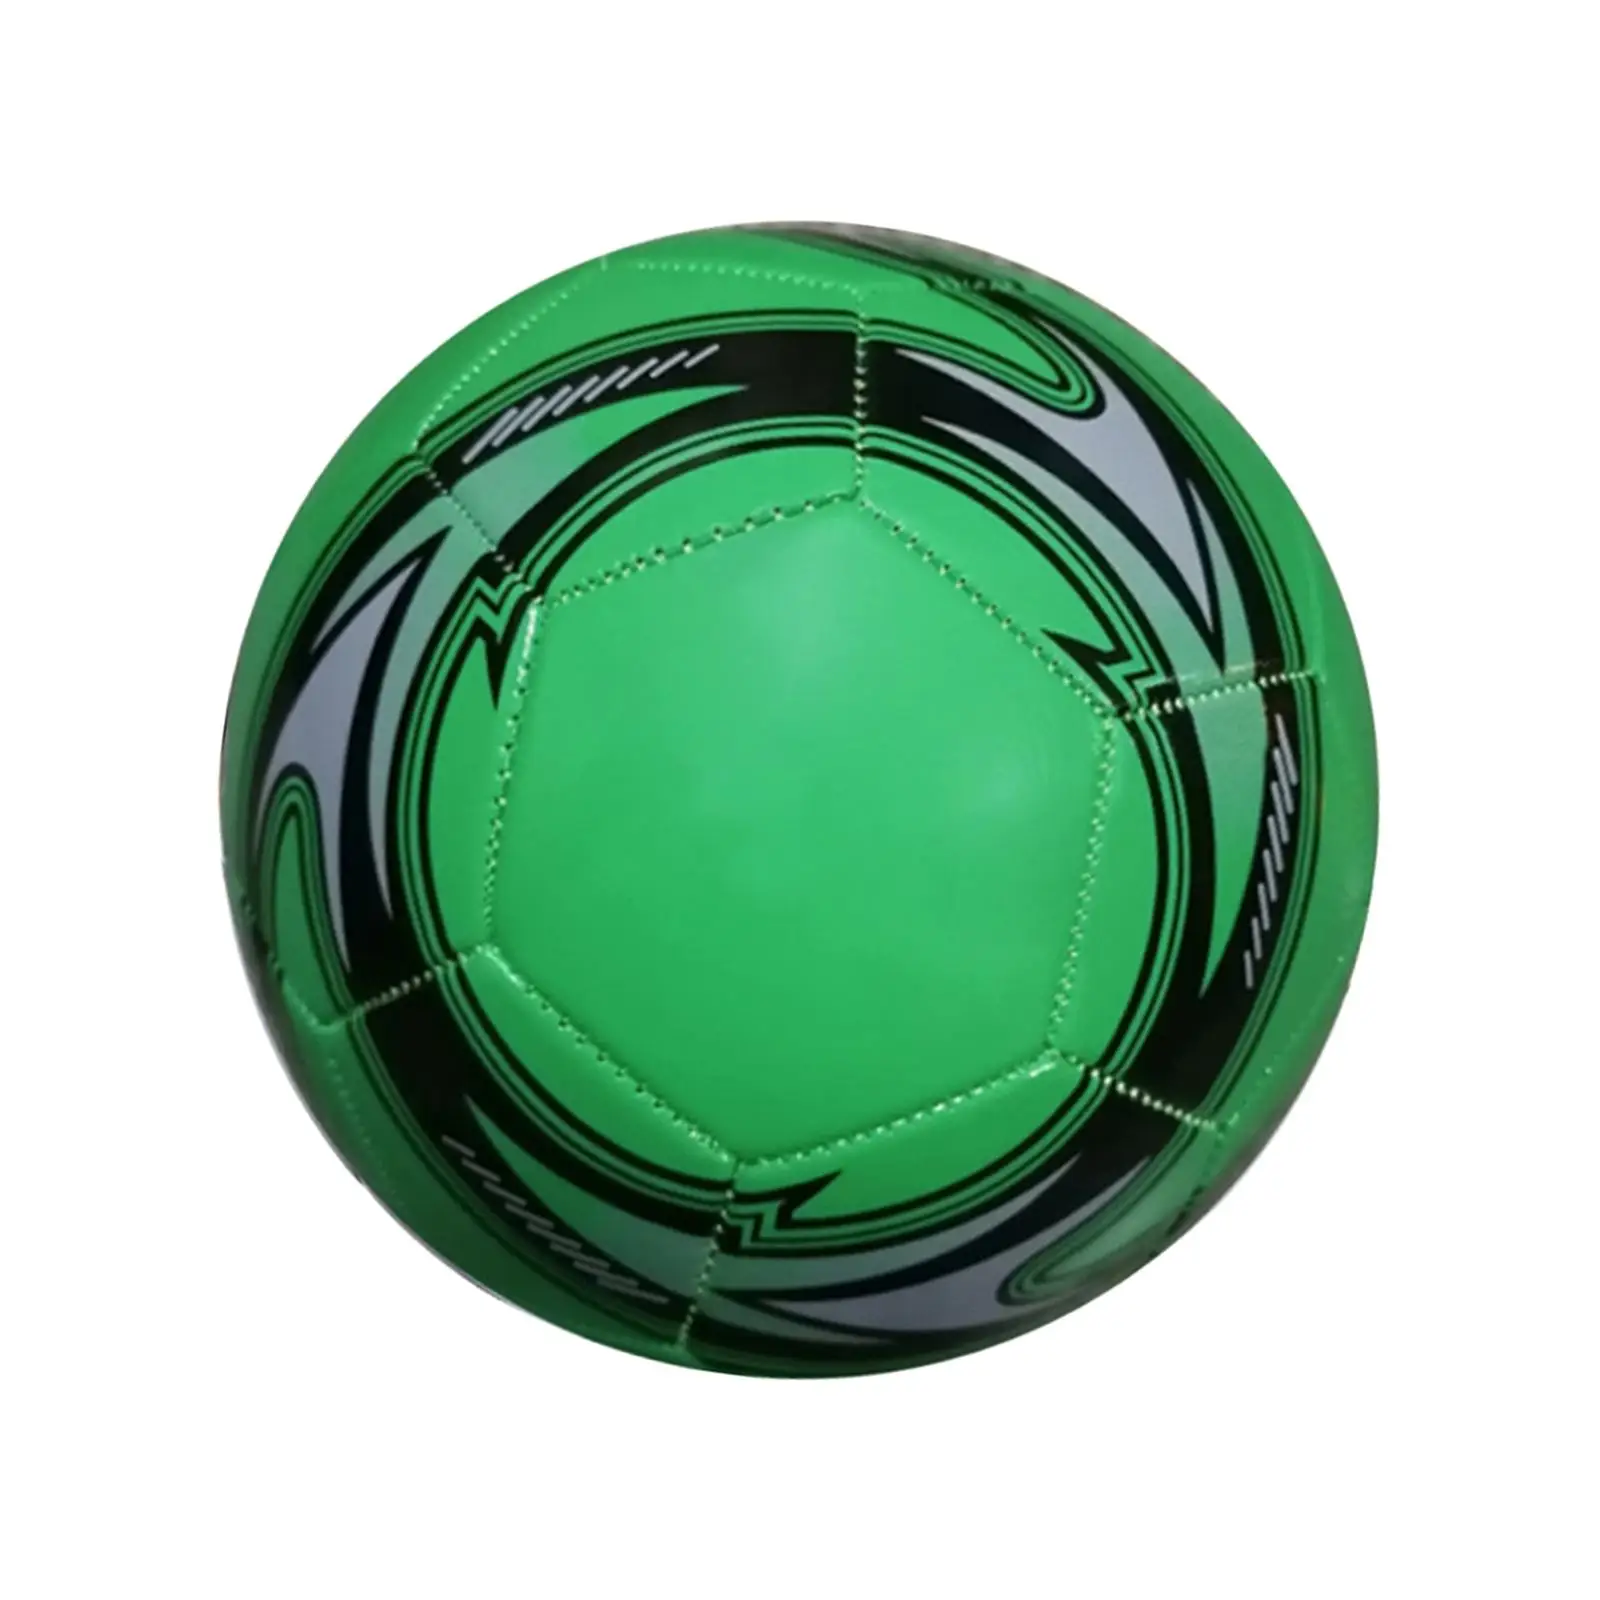 Soccer Ball 21cm Durable Wear Resistant Size 5 for Athletic Beginners Adults